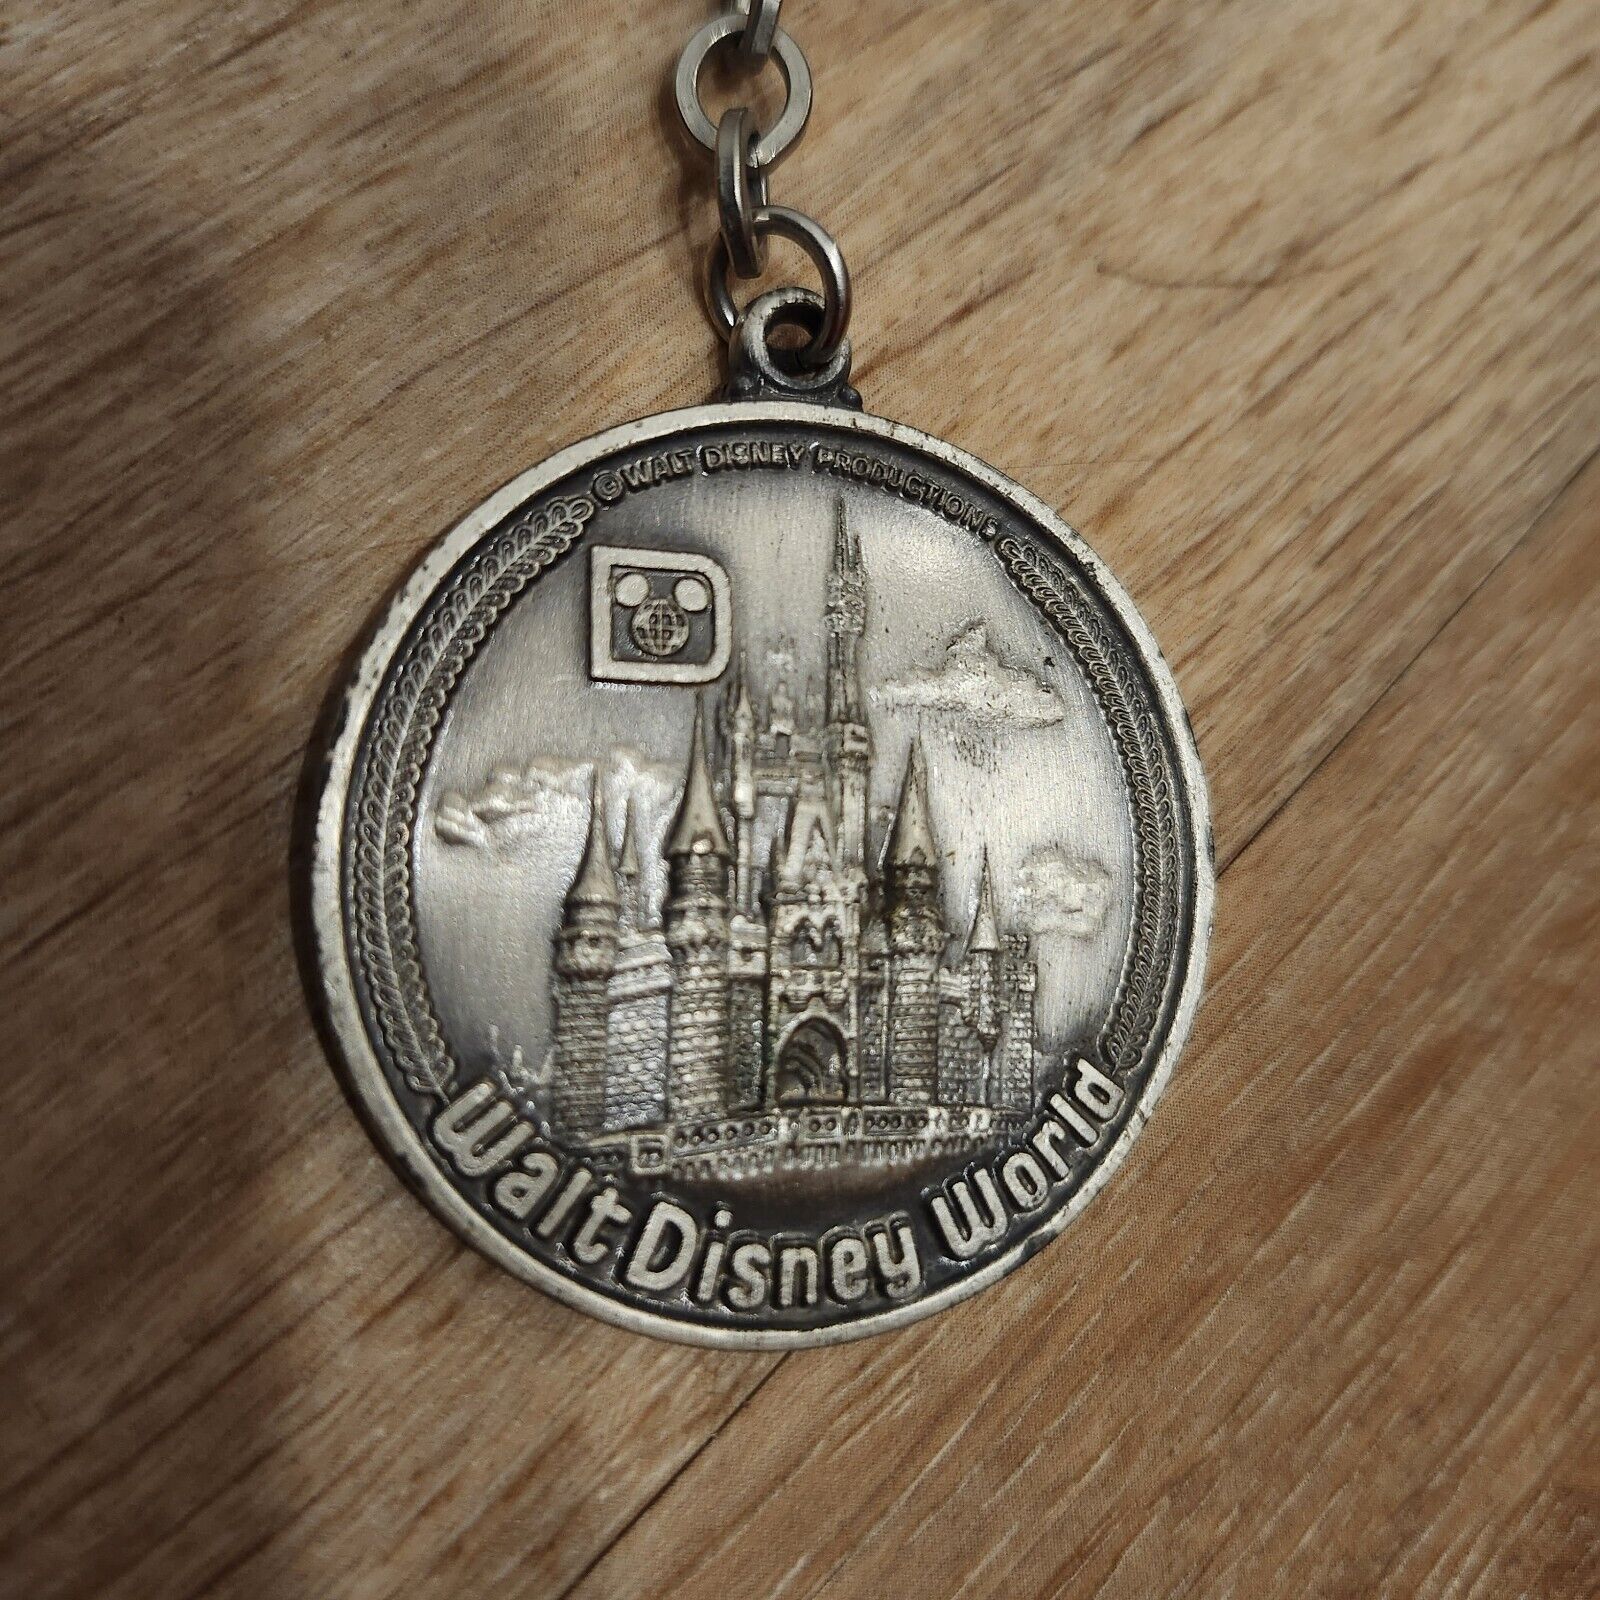 Vintage Walt Disney World Keychain Liberty Square Frontierland All the Lands